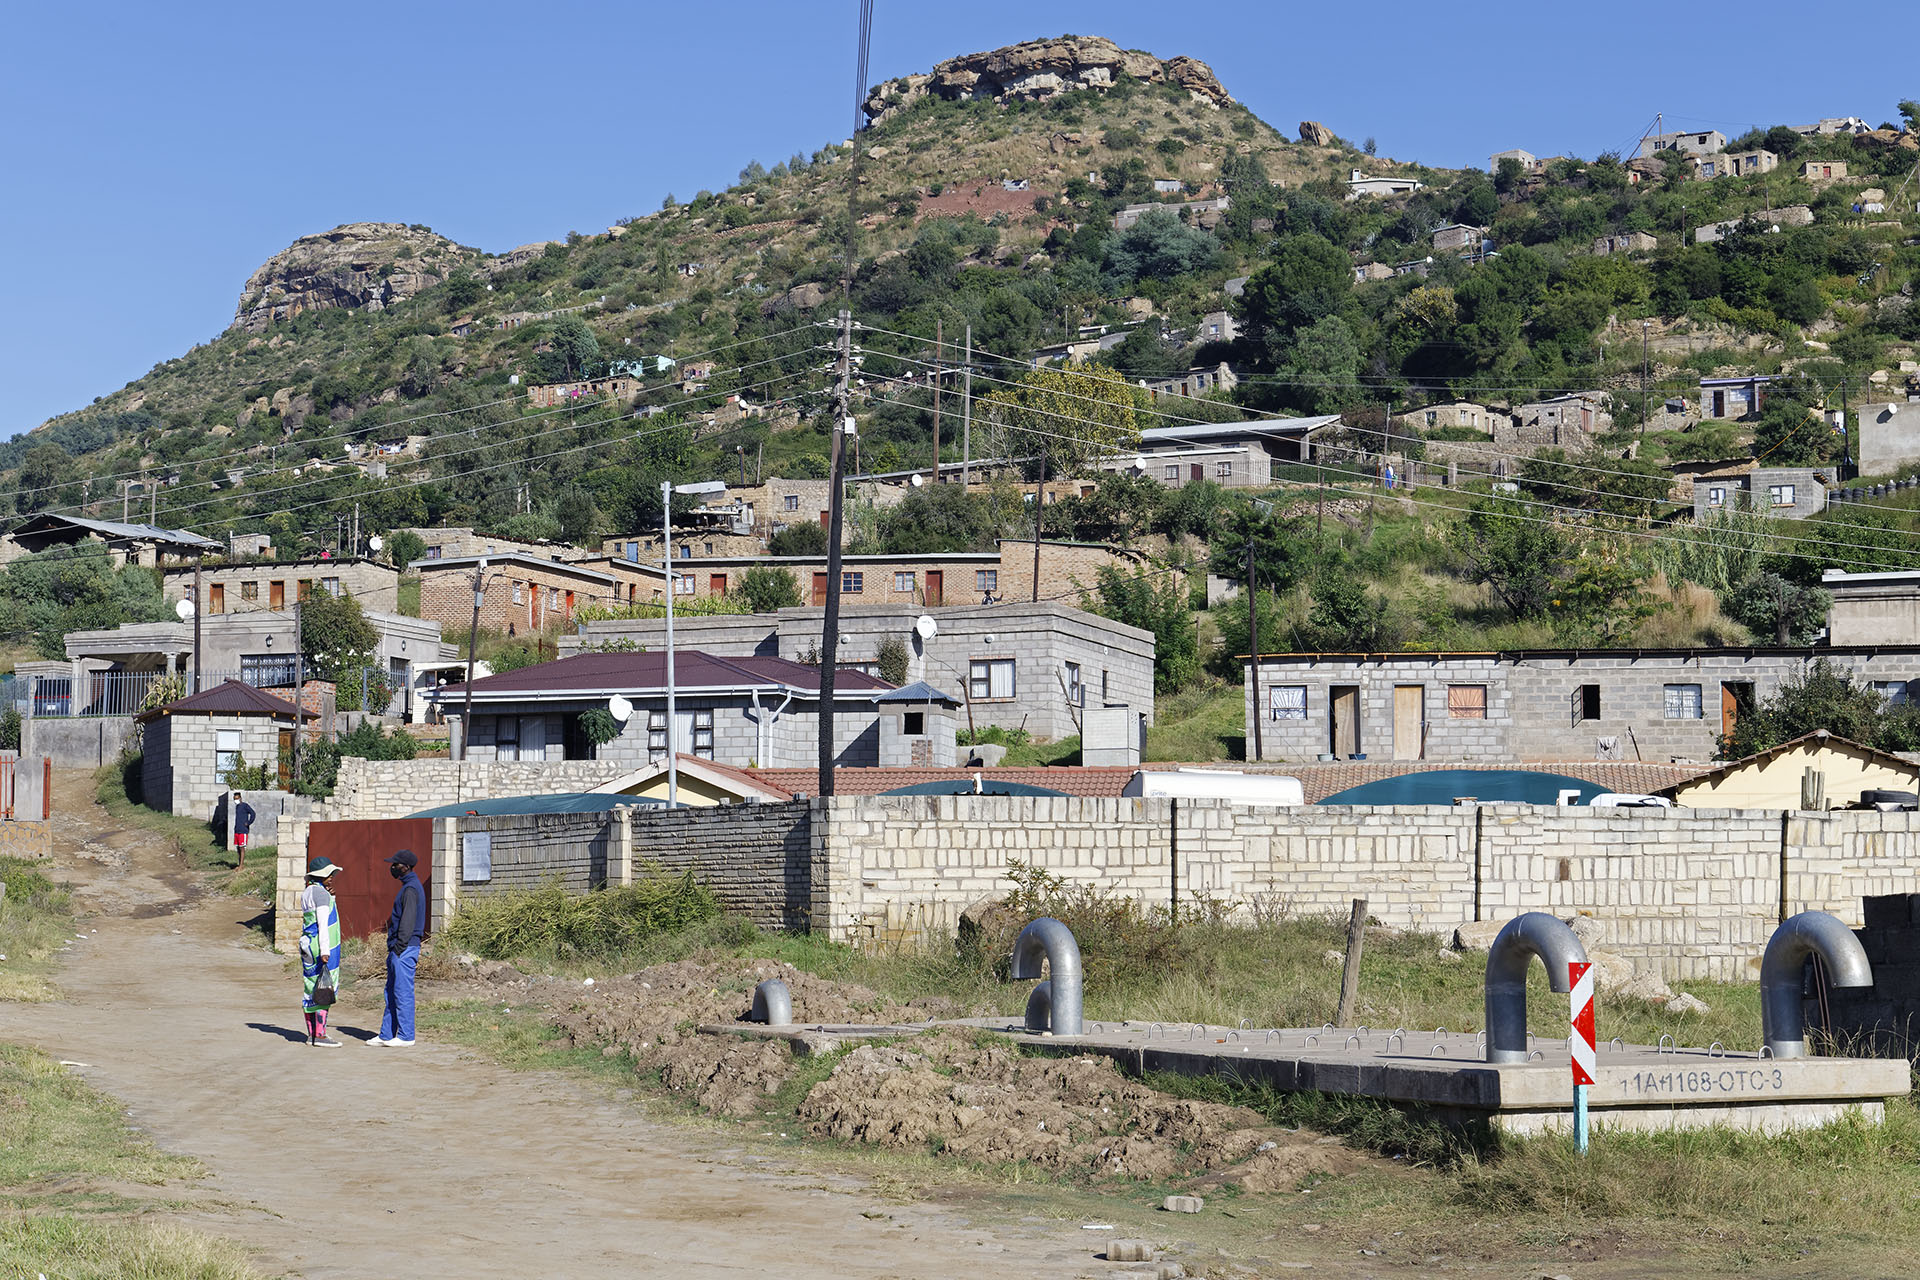 Photo of a village with a mountain and houses in the backdrop and a few people standing on the left side of the road